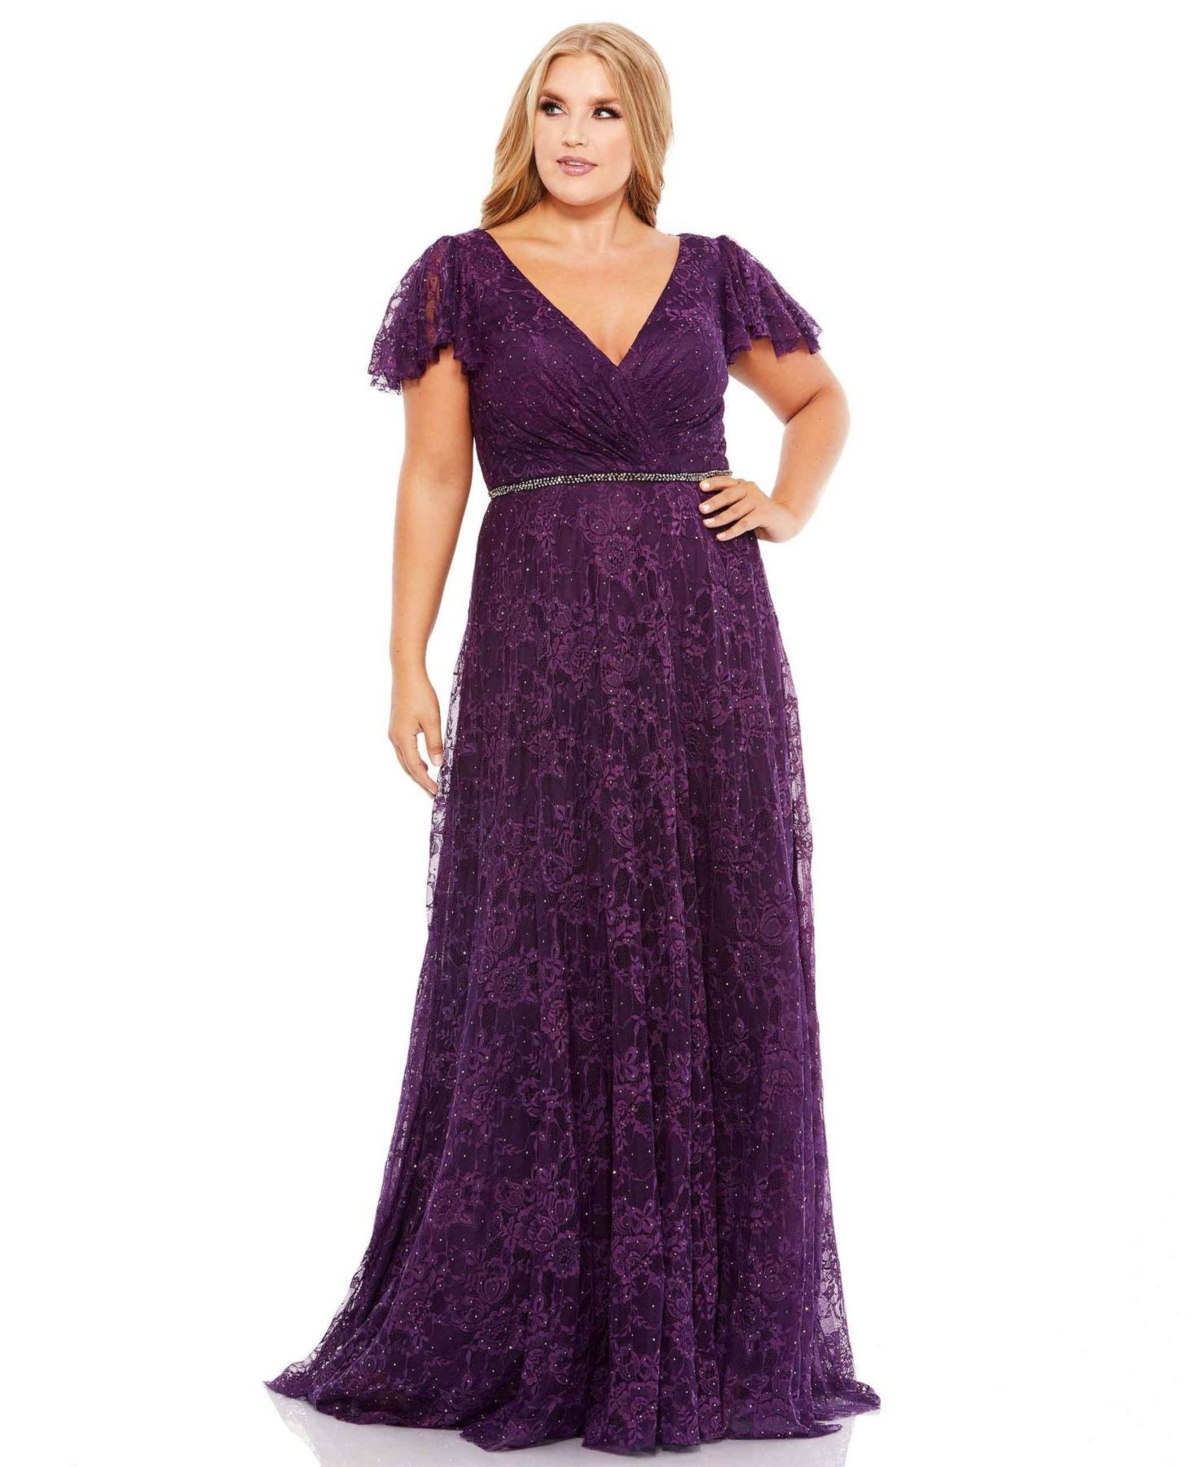 MAC DUGGAL WOMEN'S PLUS SIZE EMBELLISHED FLUTTER SLEEVE EVENING GOWN